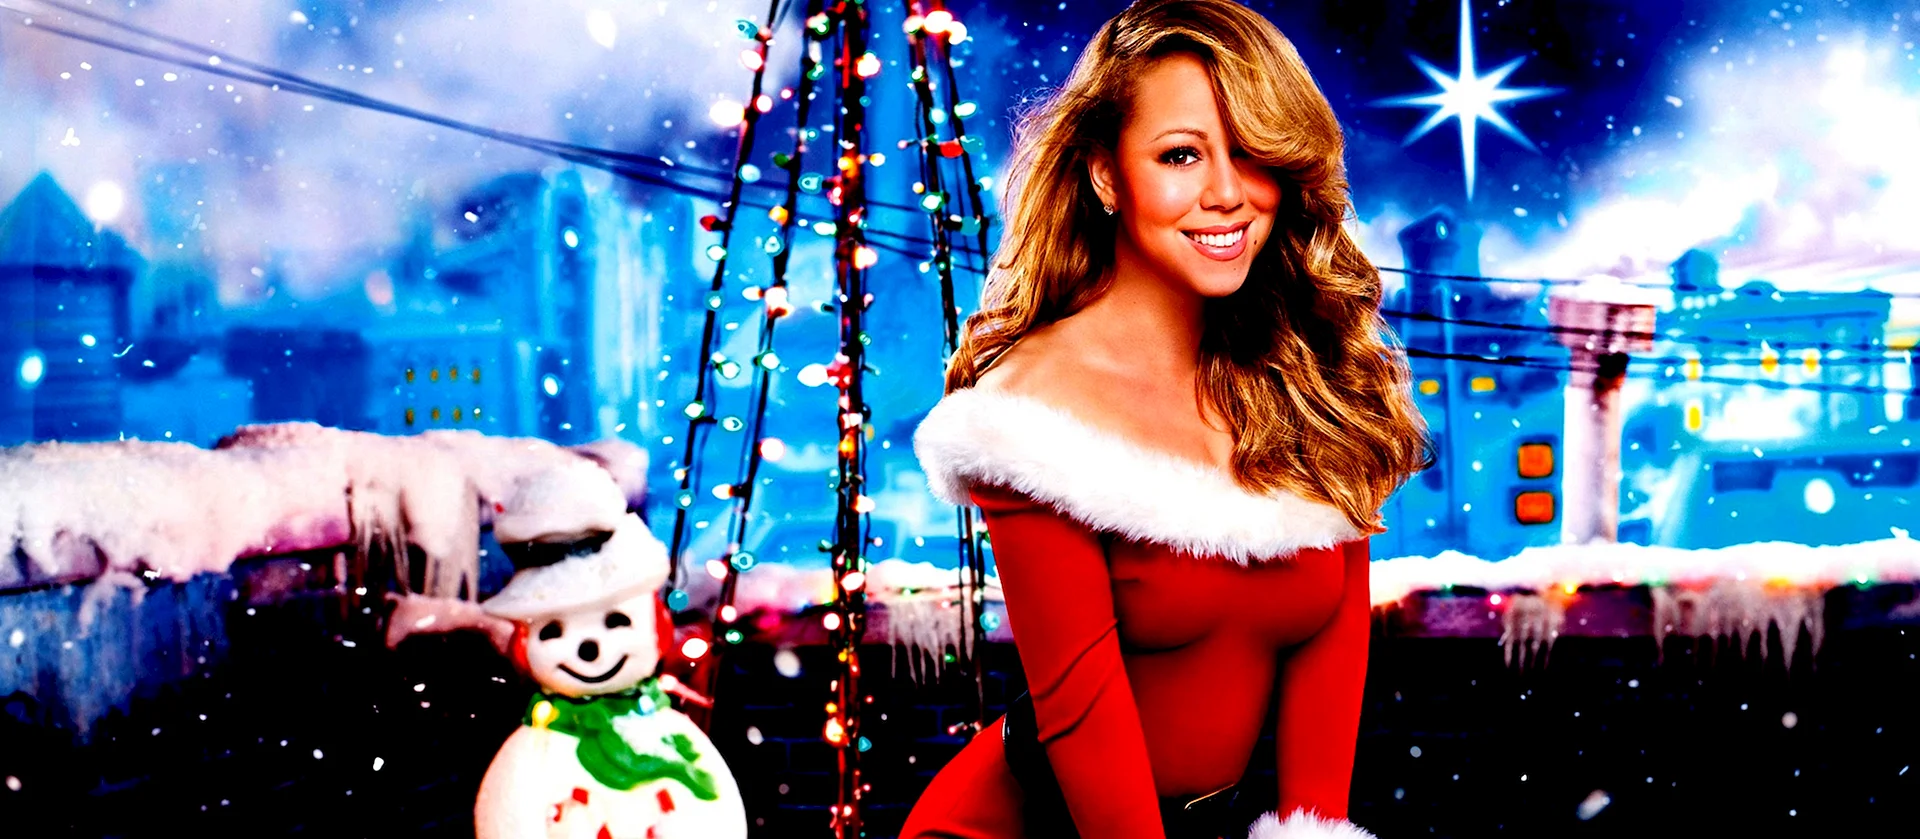 Mariah Carey All I Want For Christmas Is You Wallpaper